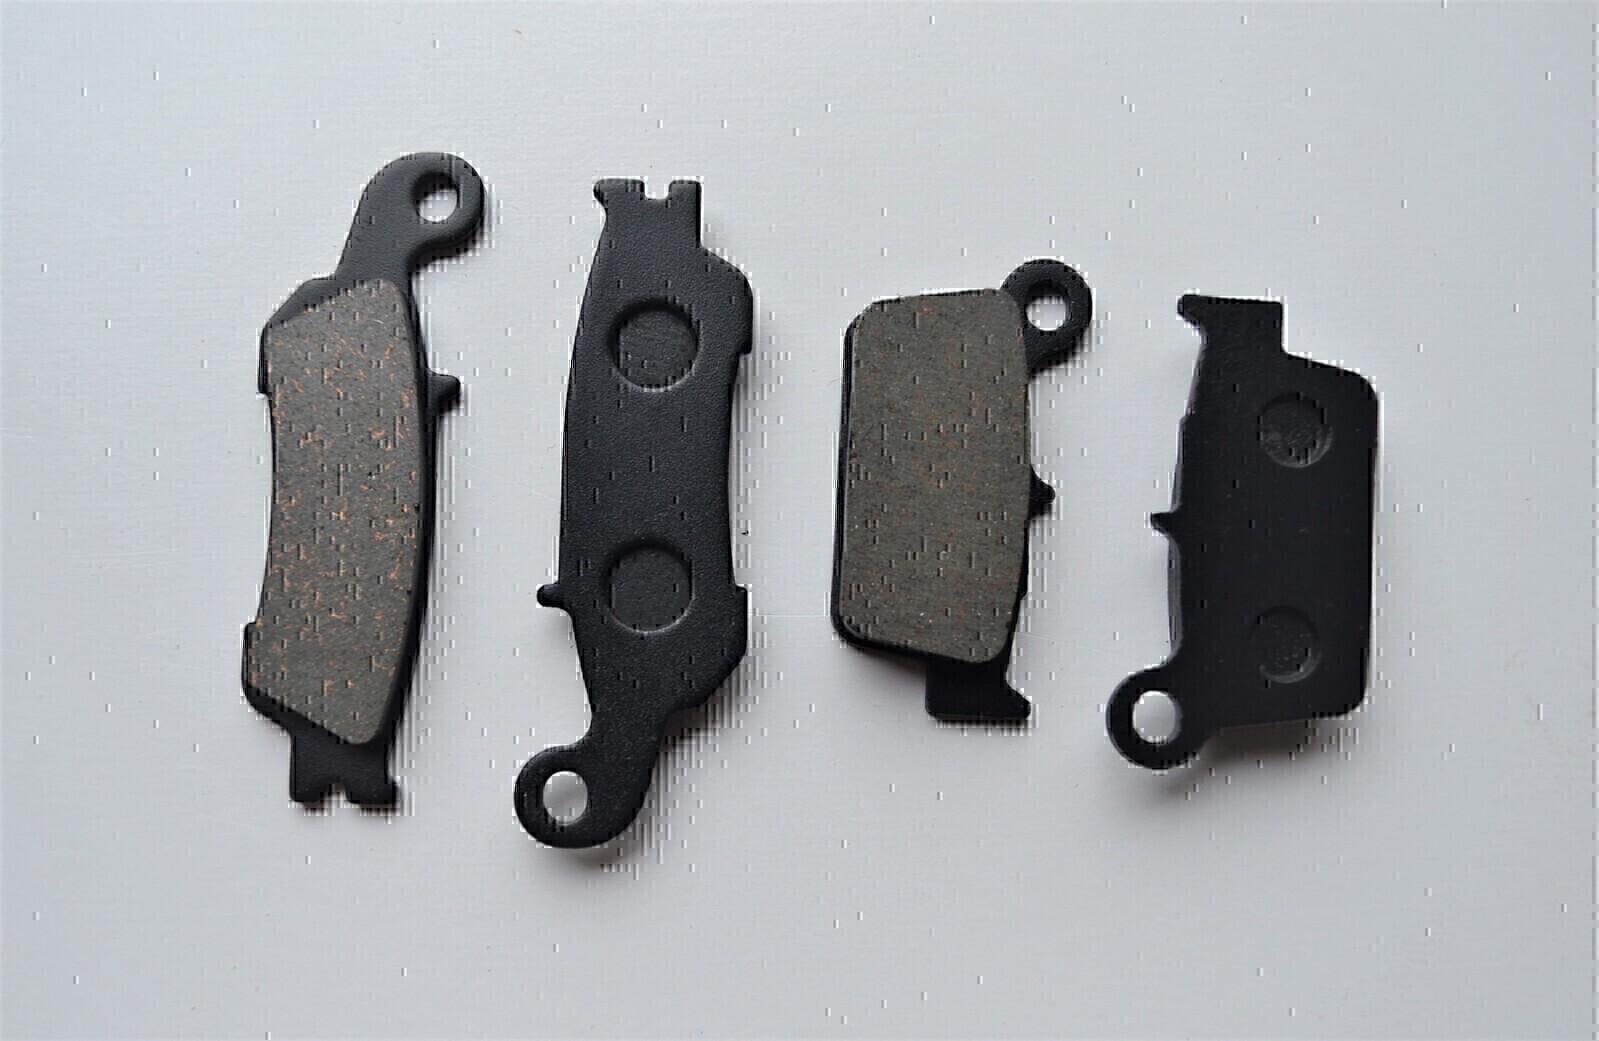 FRONT AND REAR BRAKE PADS FOR YAMAHA YZ450F / YZ250F / YZ125 / YZ250 - 2008 - 2021 (SEE DESCRIPTION LIST)